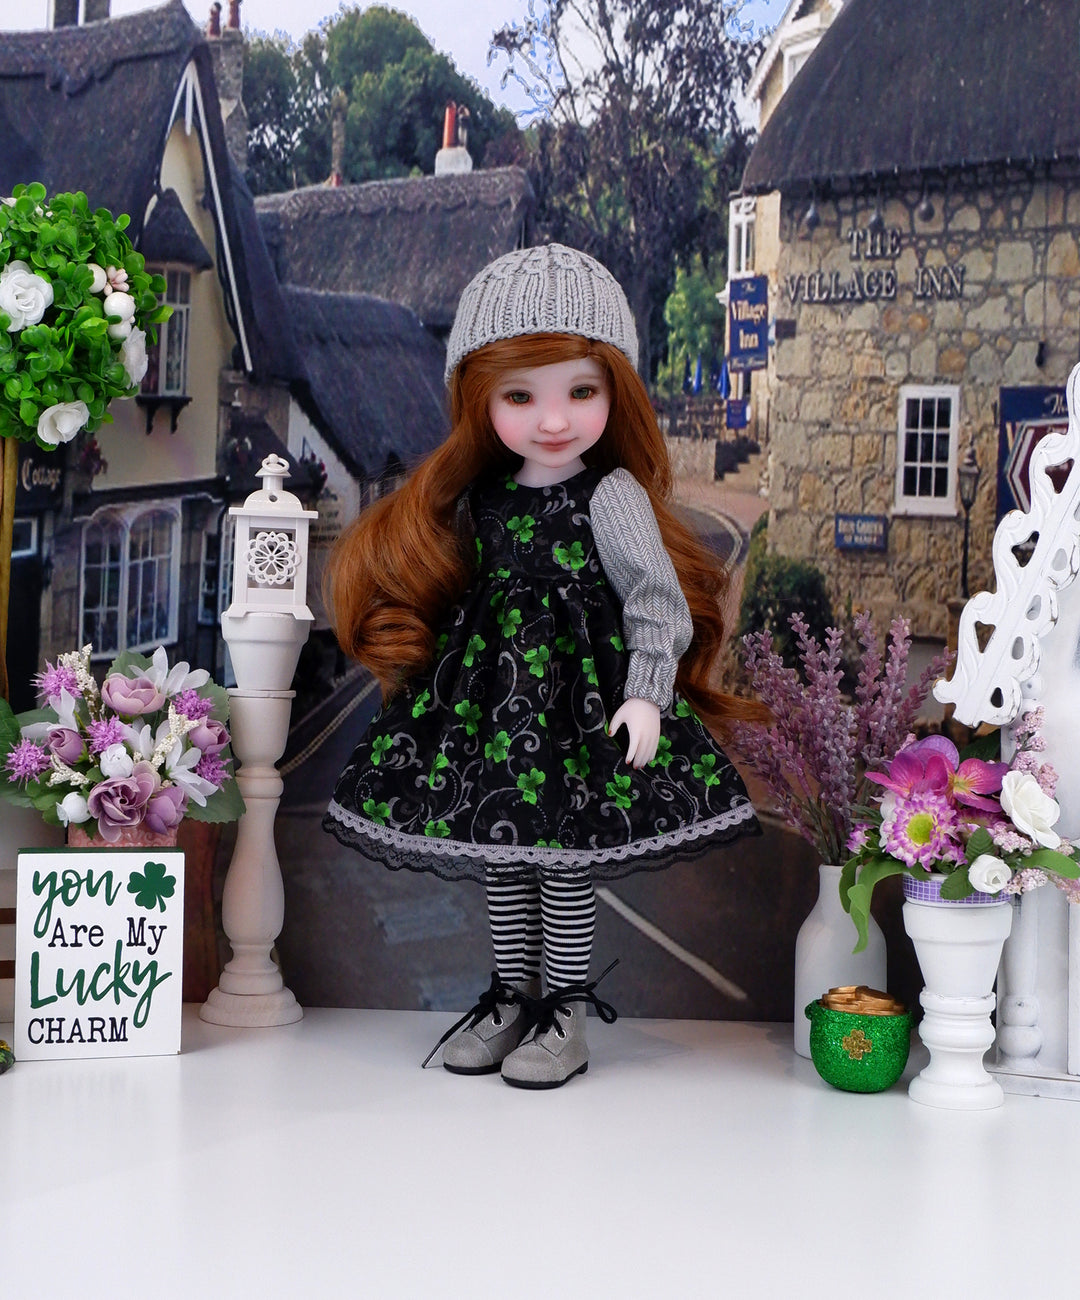 Emerald Isle - dress ensemble with boots for Ruby Red Fashion Friends doll